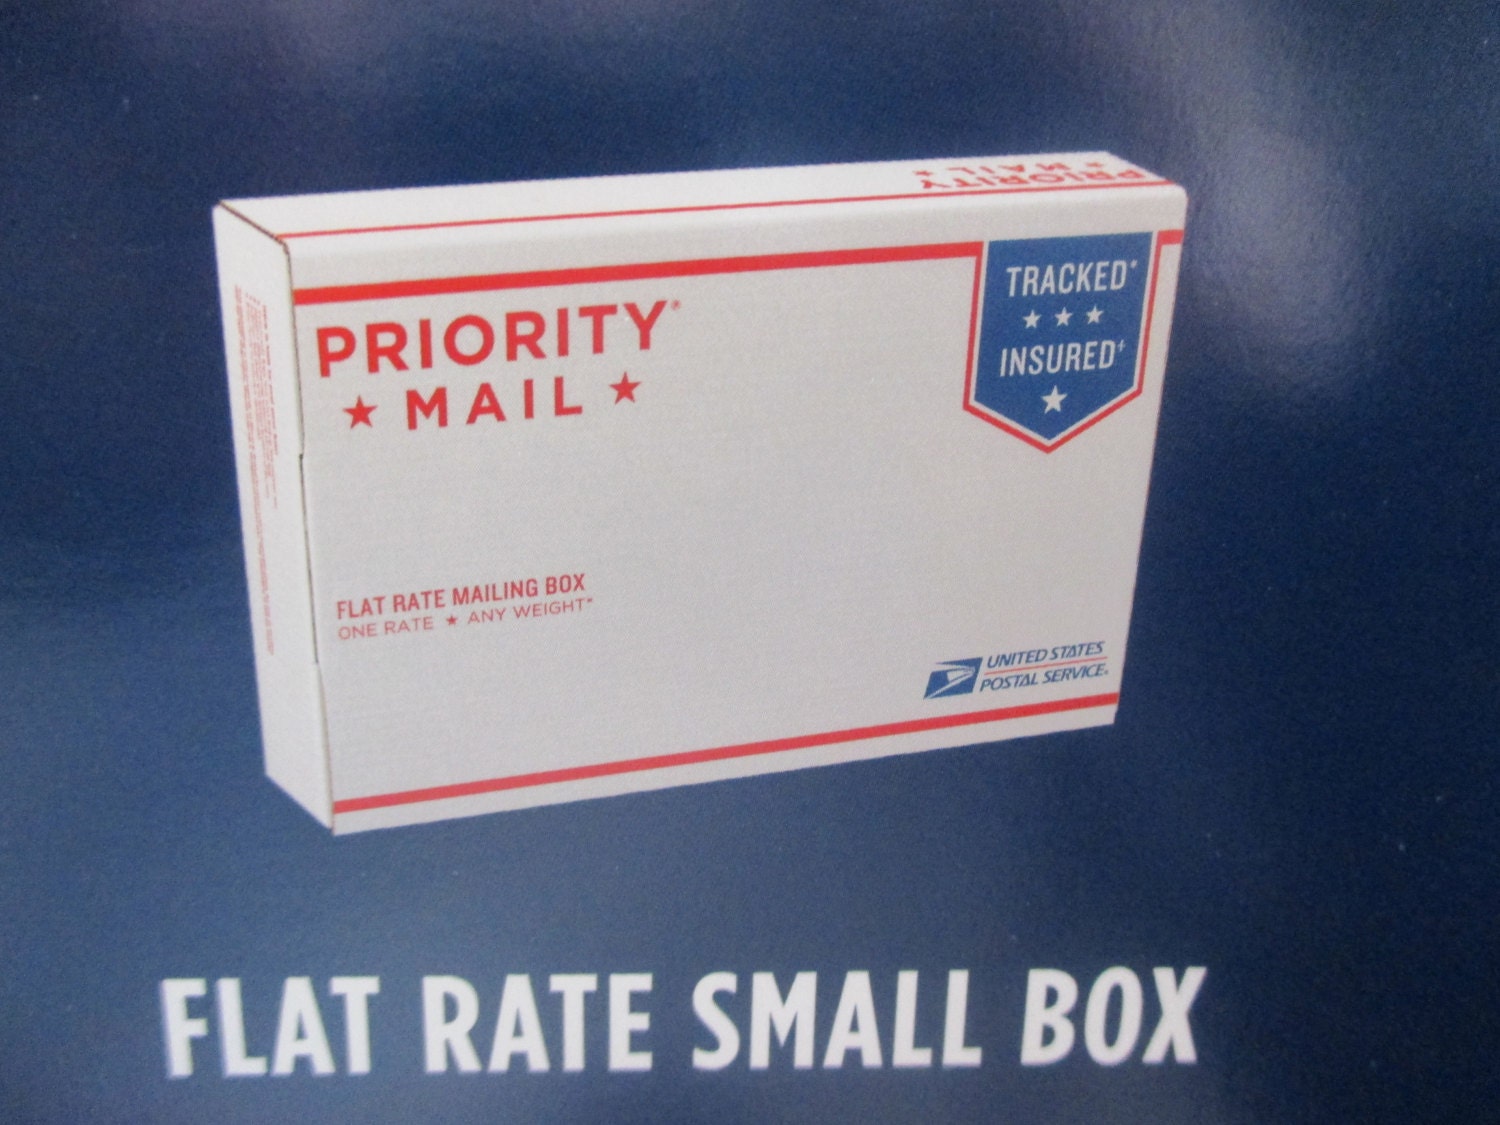 usps priority flat rate boxes